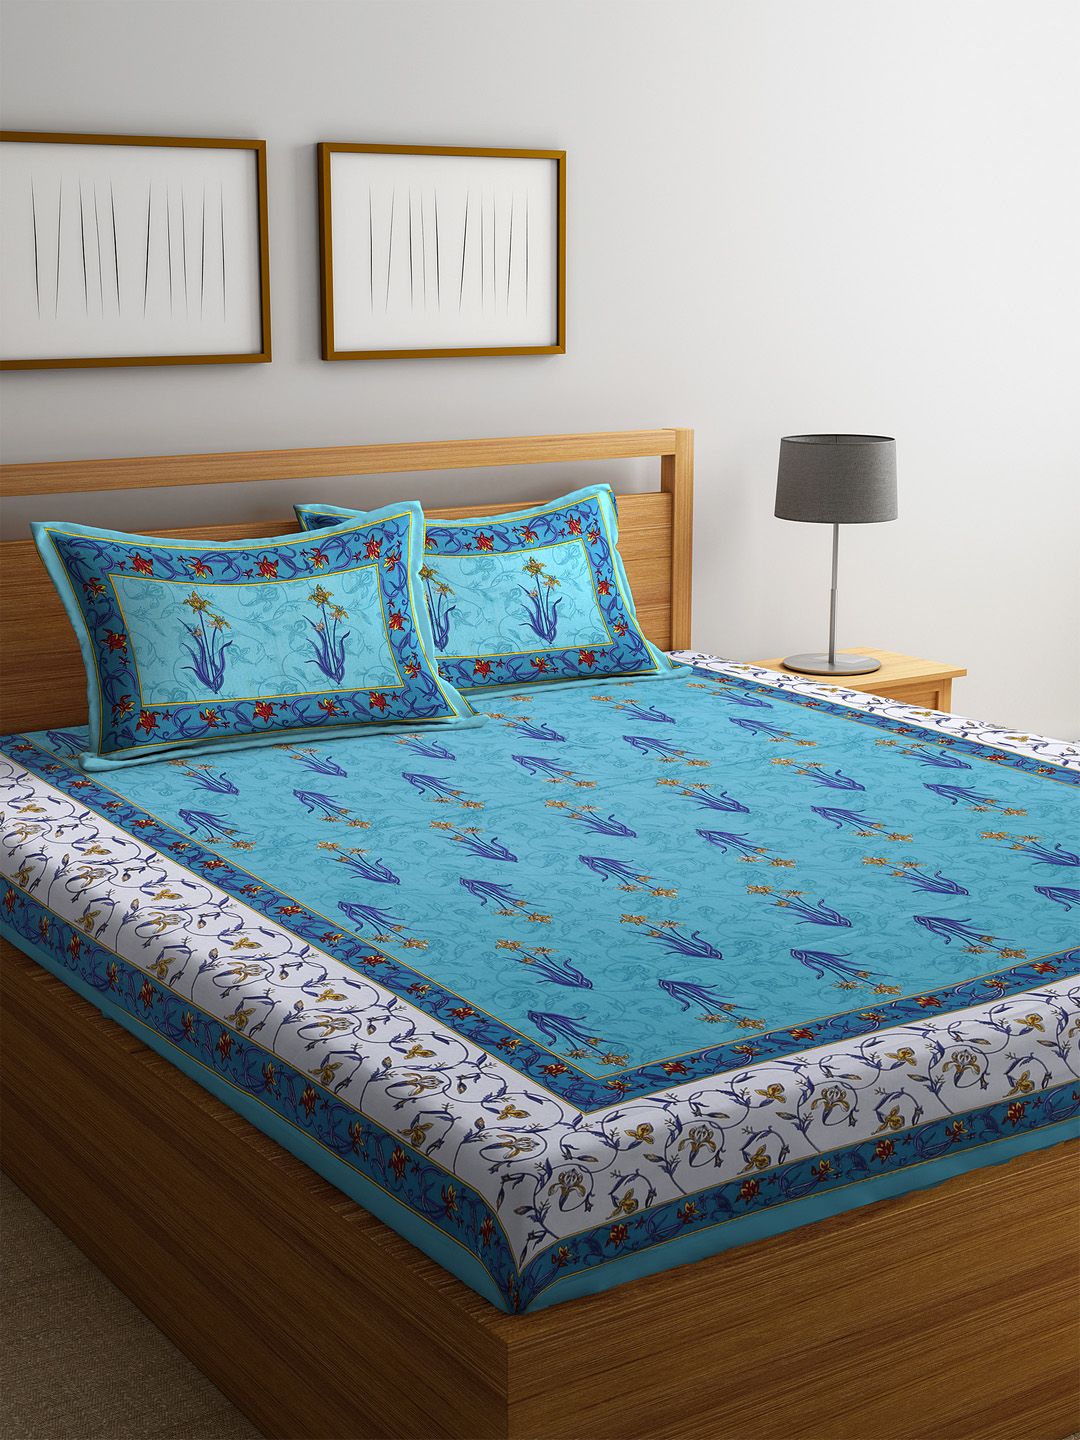 Rajasthan Decor Blue & White Floral Flat 144 TC Cotton Double Bedsheet with Pillow Covers Price in India